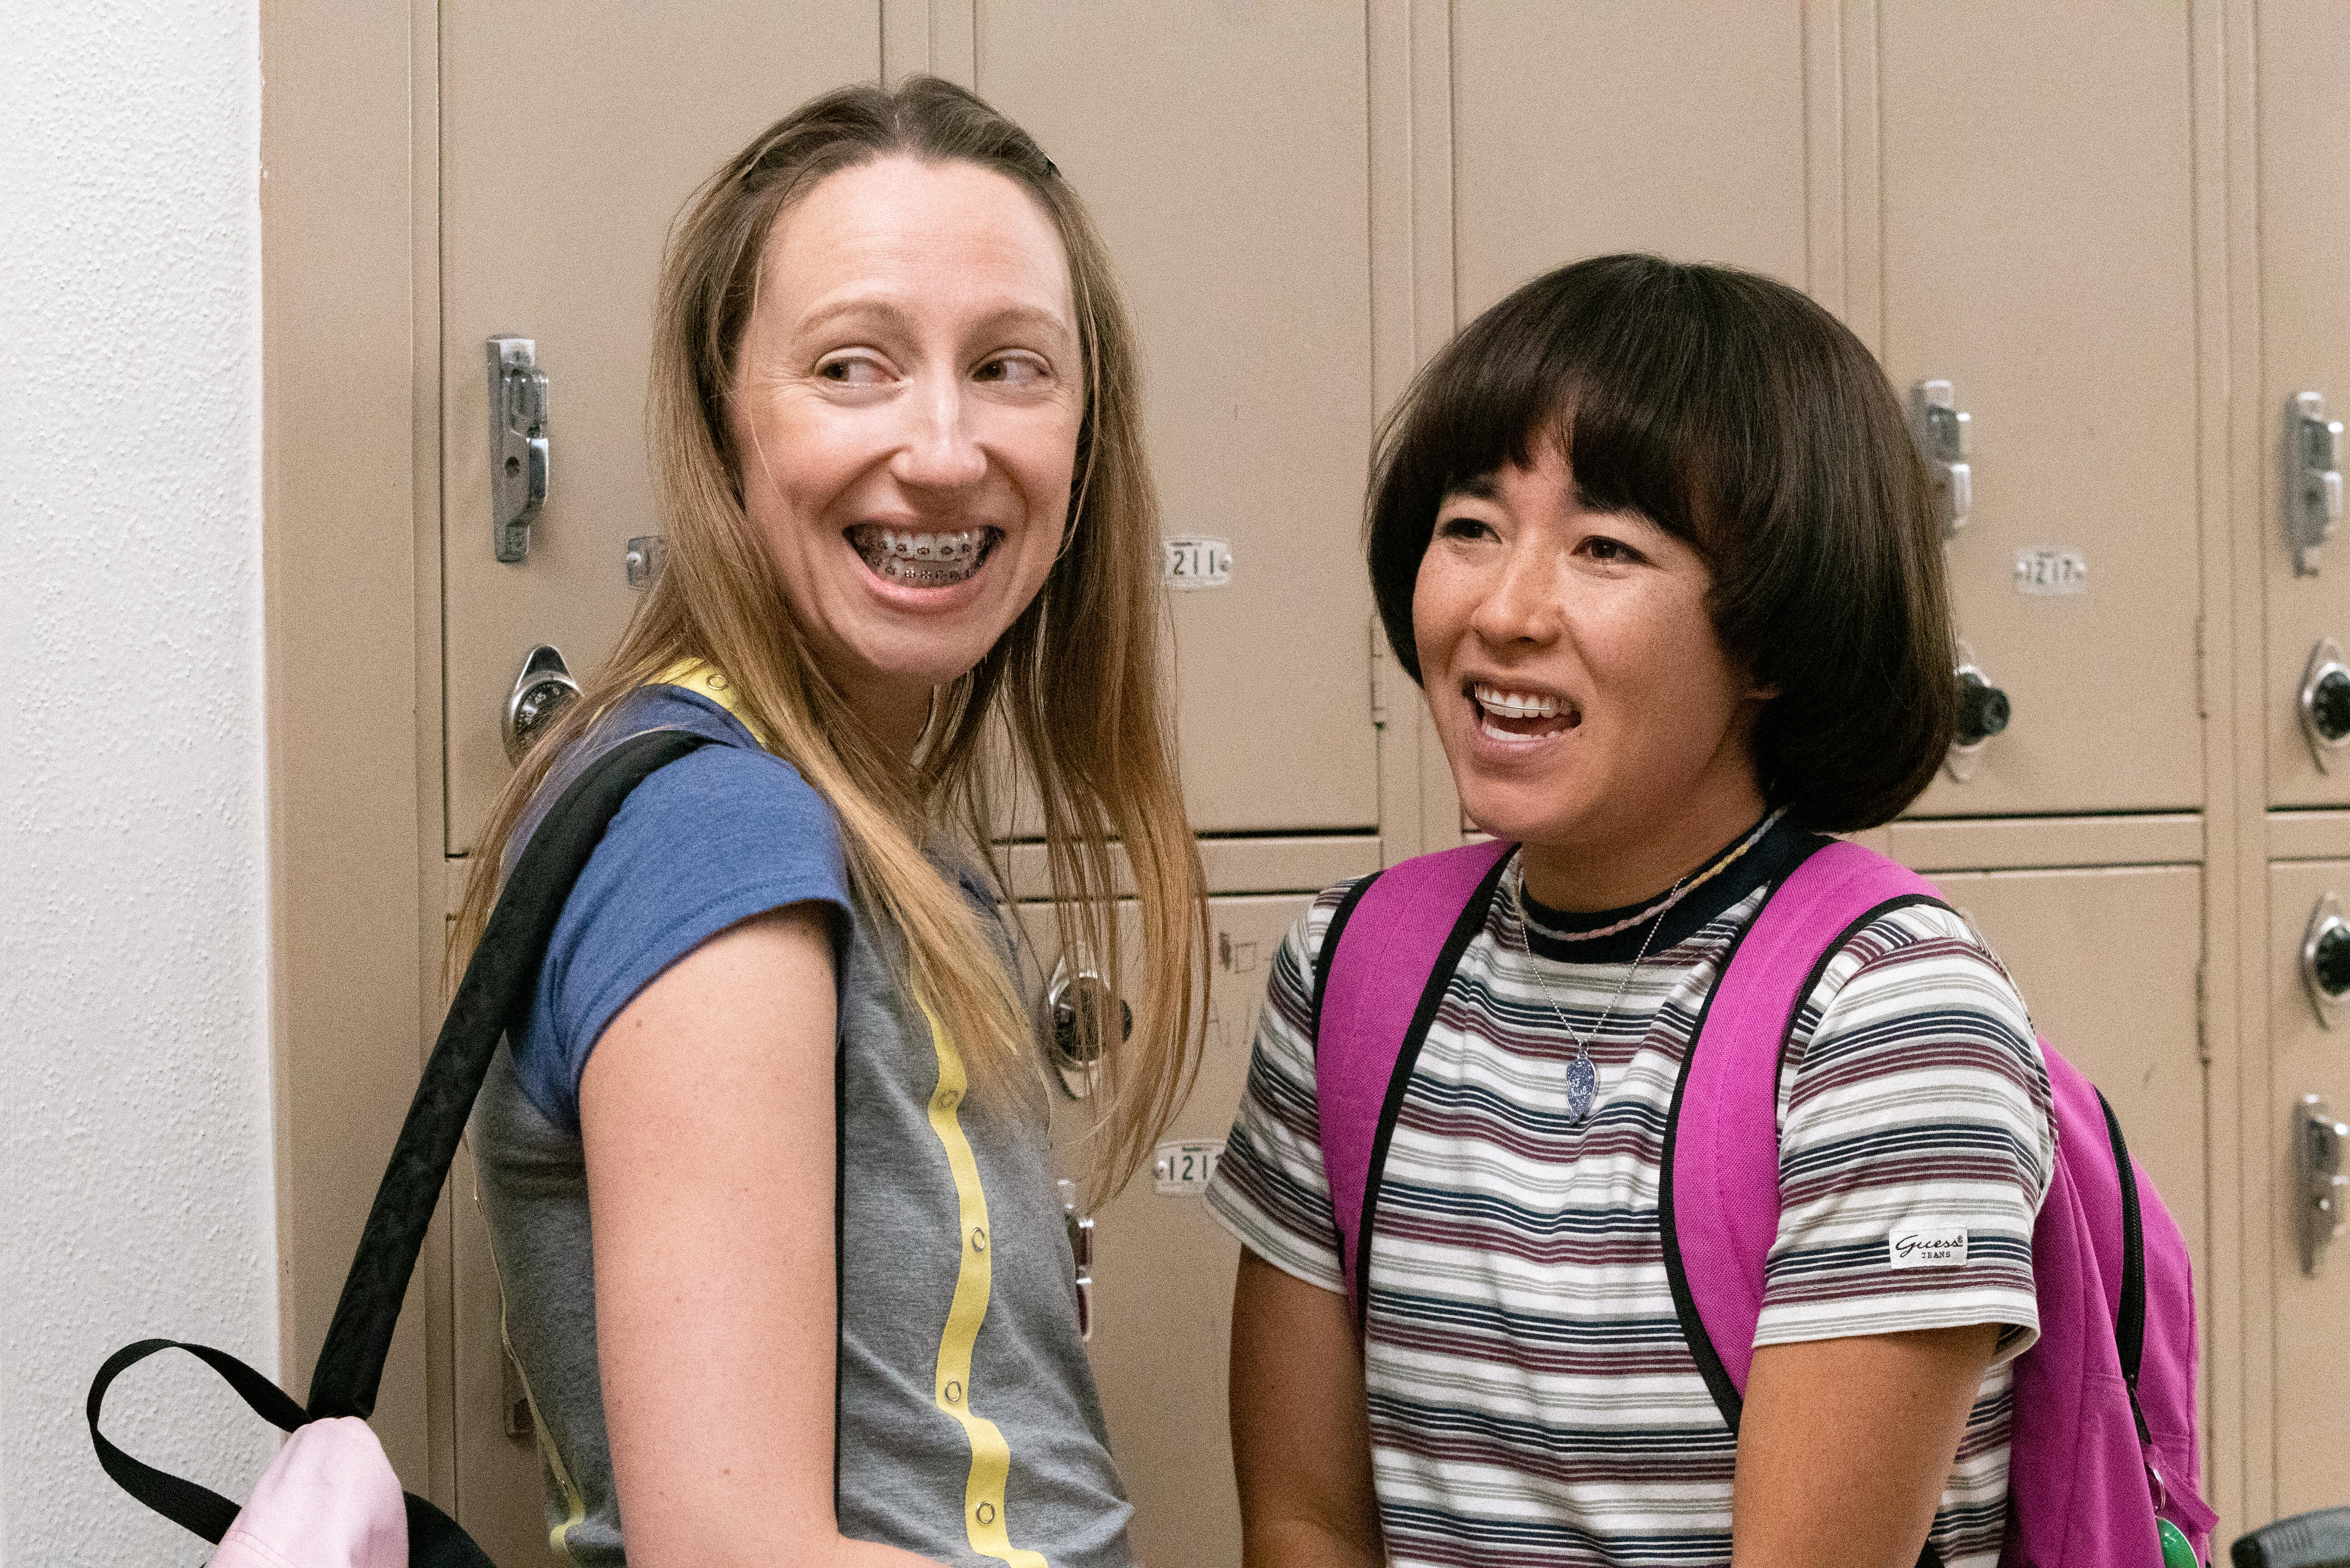 Anna Konkel and Maya Erskine wear backpacks and smile next to a row of tan lockers in Pen15.